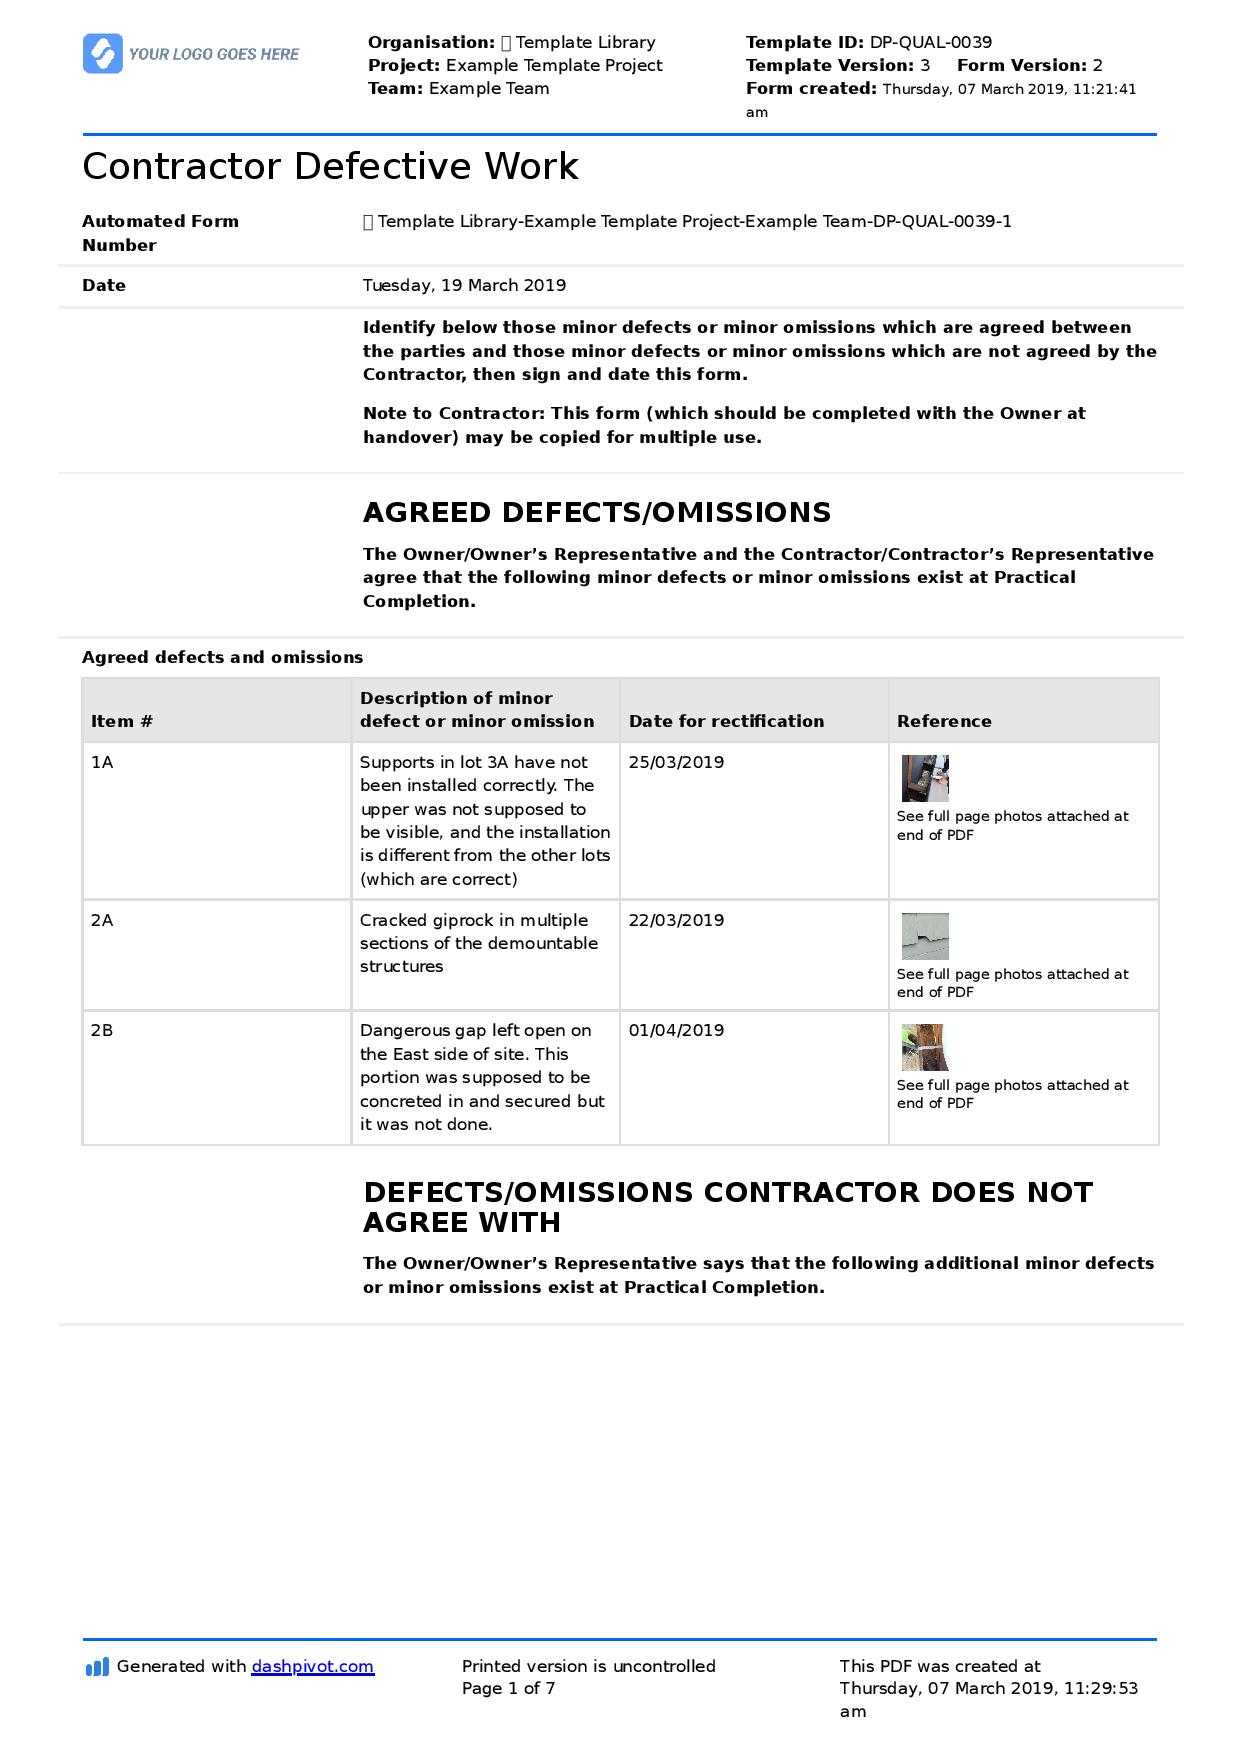 Letter To Contractor For Defective Work: Sample Letter And Throughout Construction Deficiency Report Template